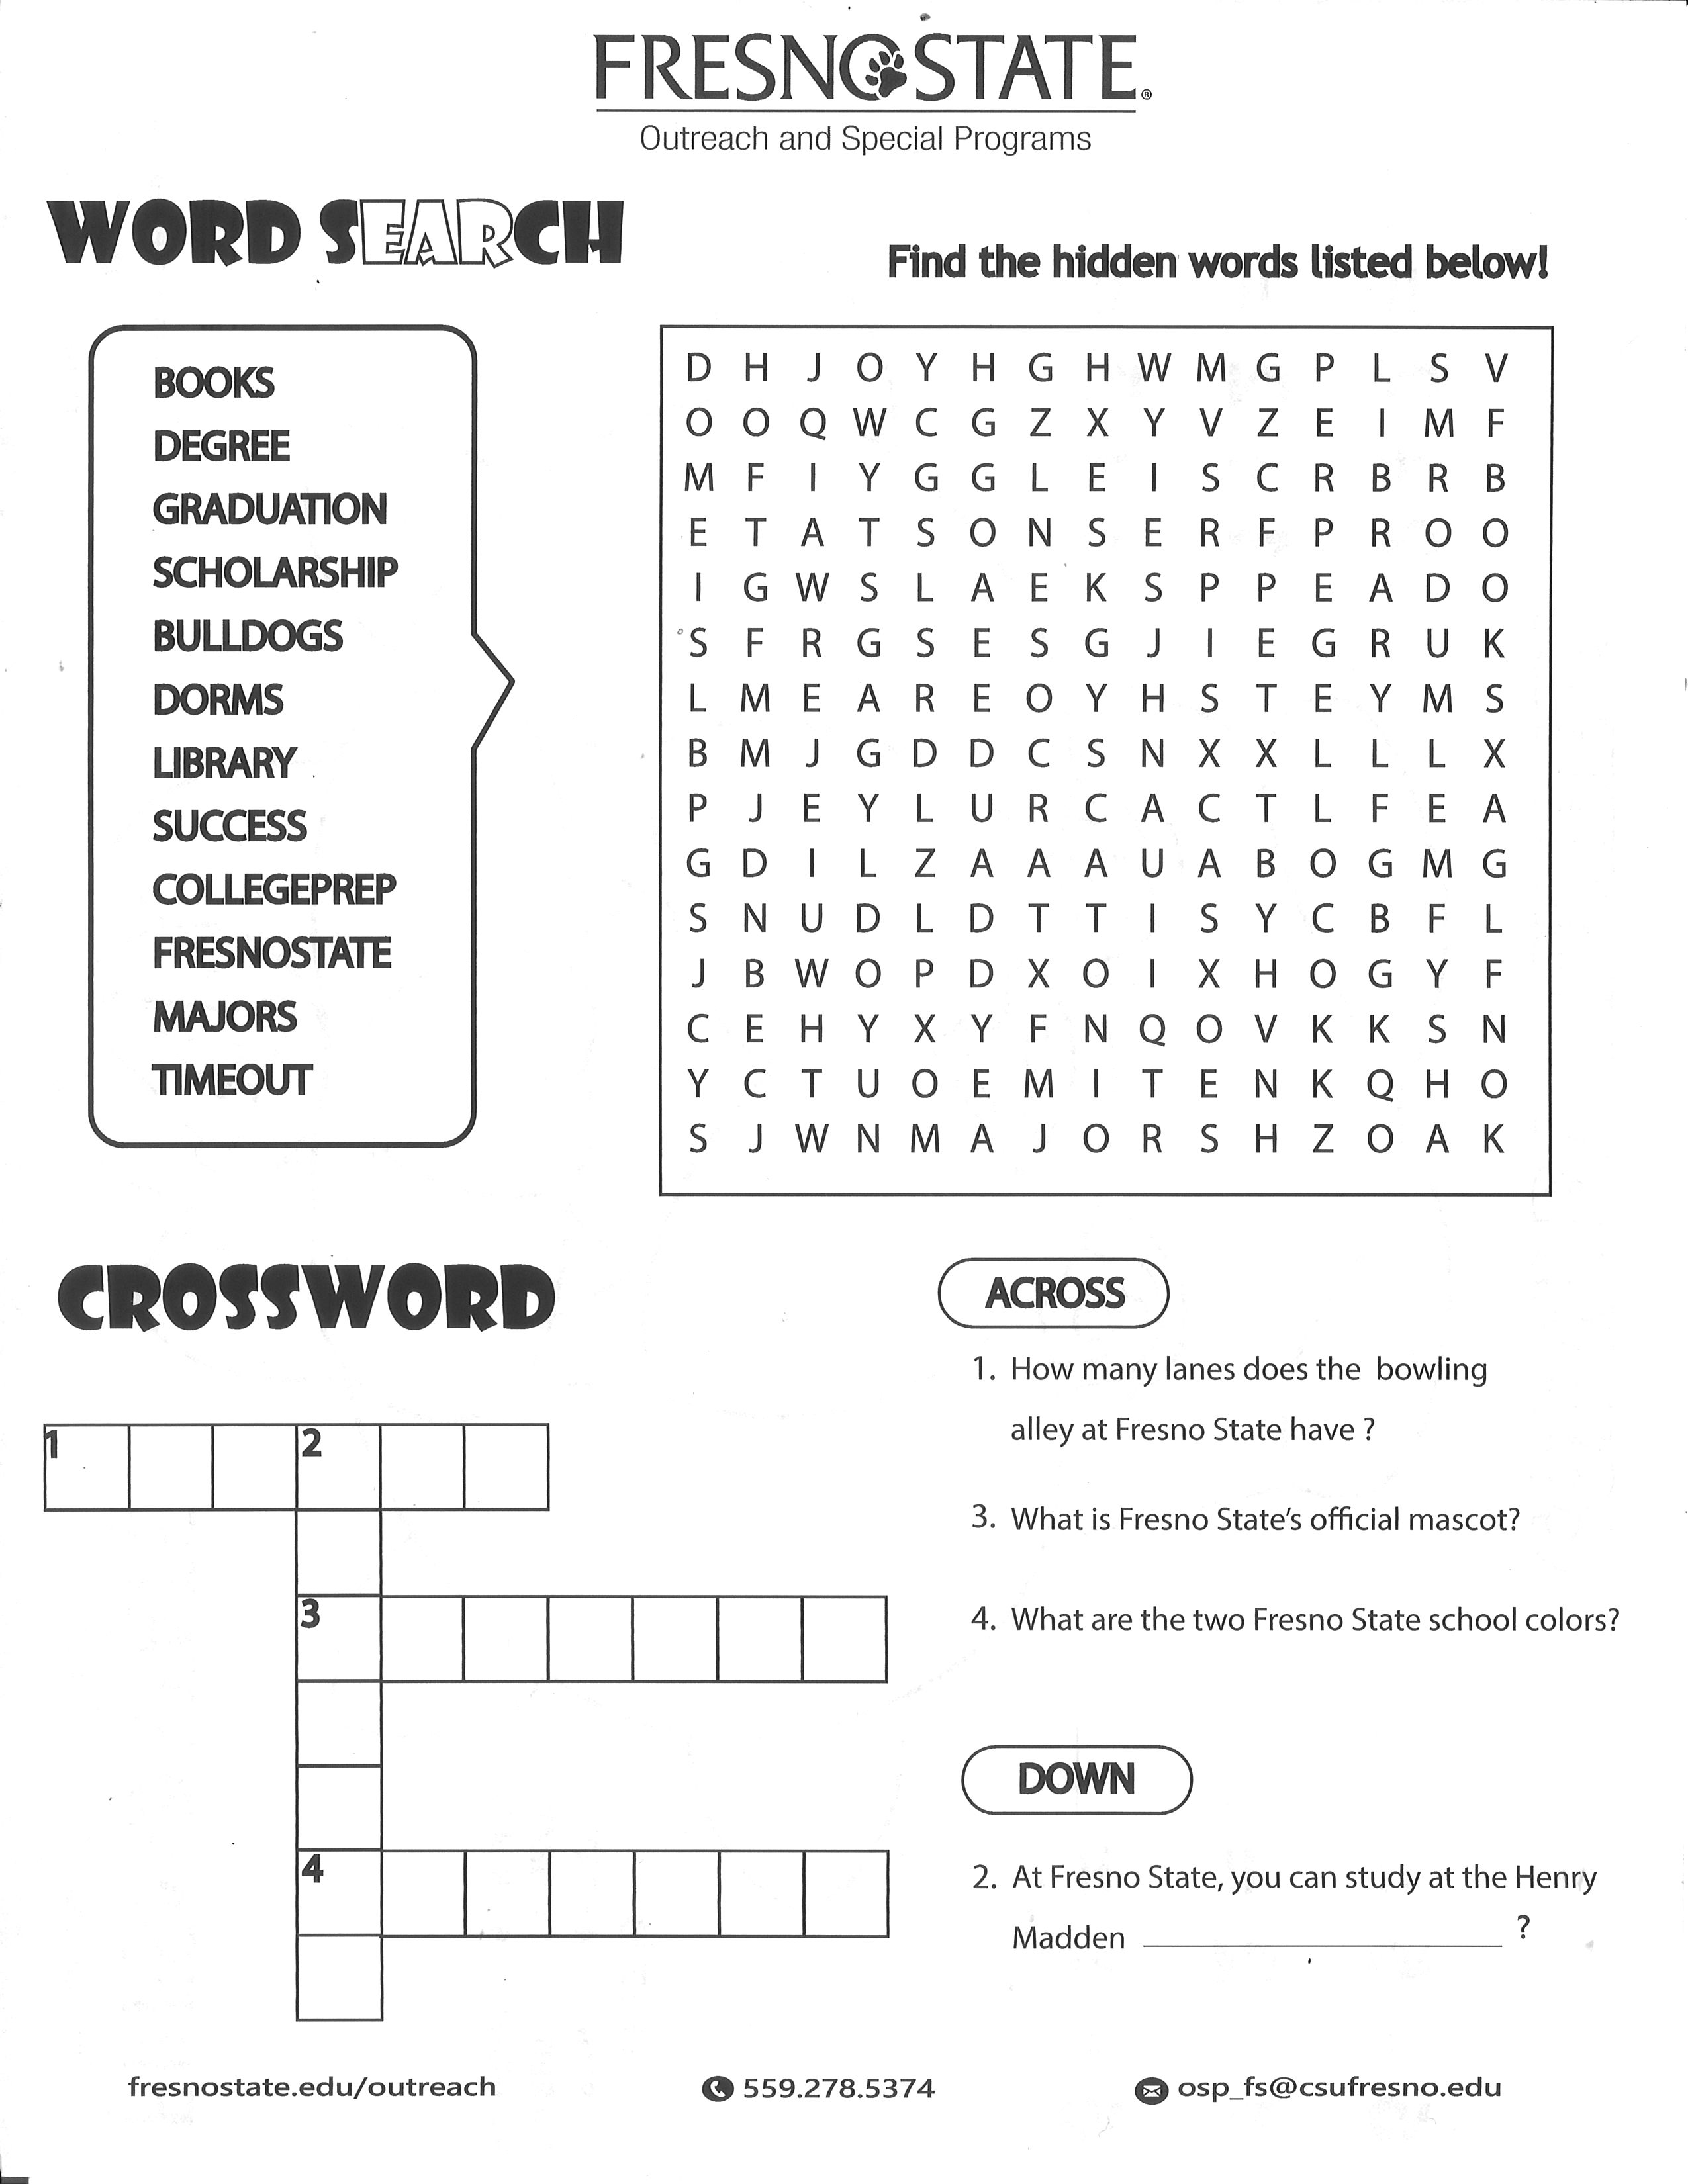 word search and crossword puzzle activity worksheet for k-8 students